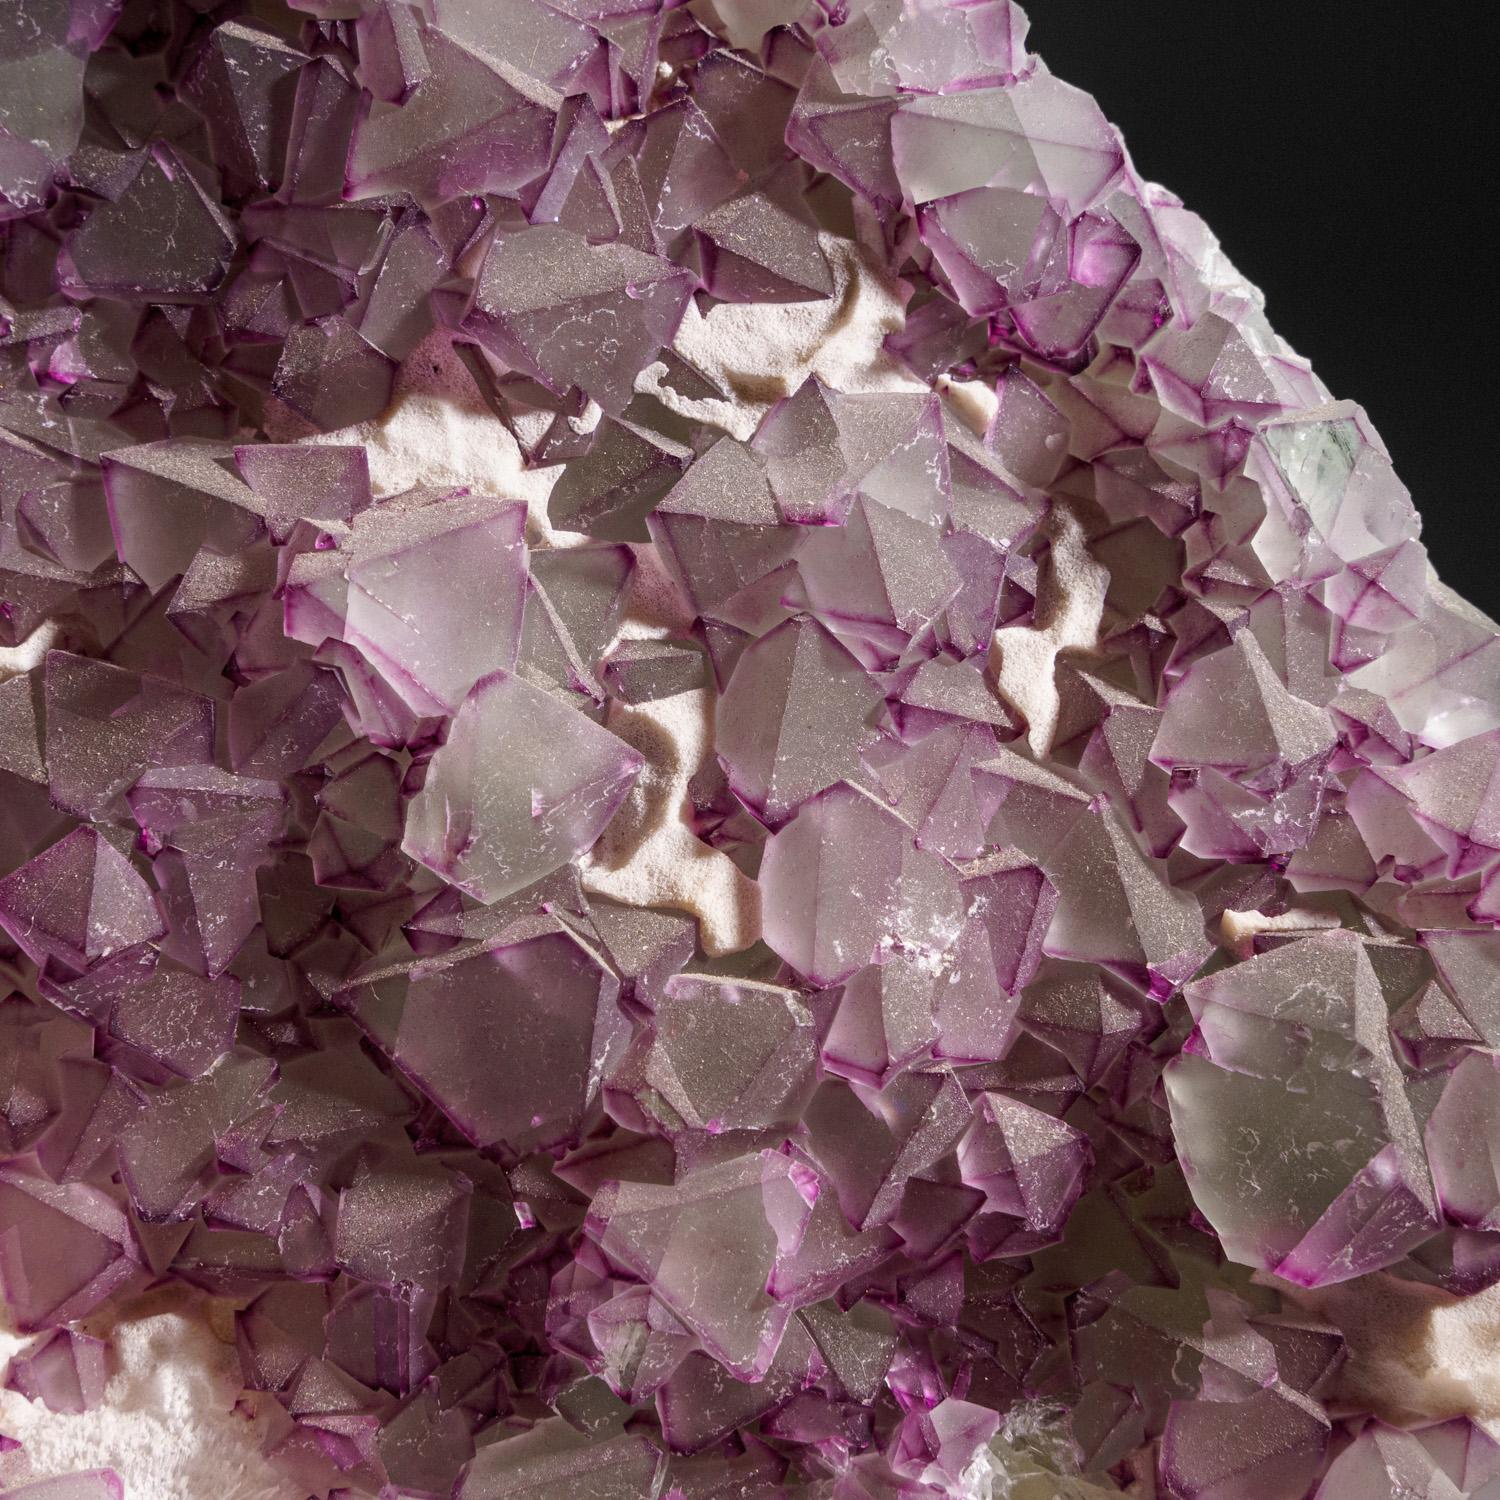 Fluorite over Quartz from De'an Mine, Wushan, Jiangxi Province, China.

From De'an Mine, Wushan, Jiangxi Province, China


Deep purple Green transparent fluorite crystals with a few pale-purple transparent purple fluorite crystals on white